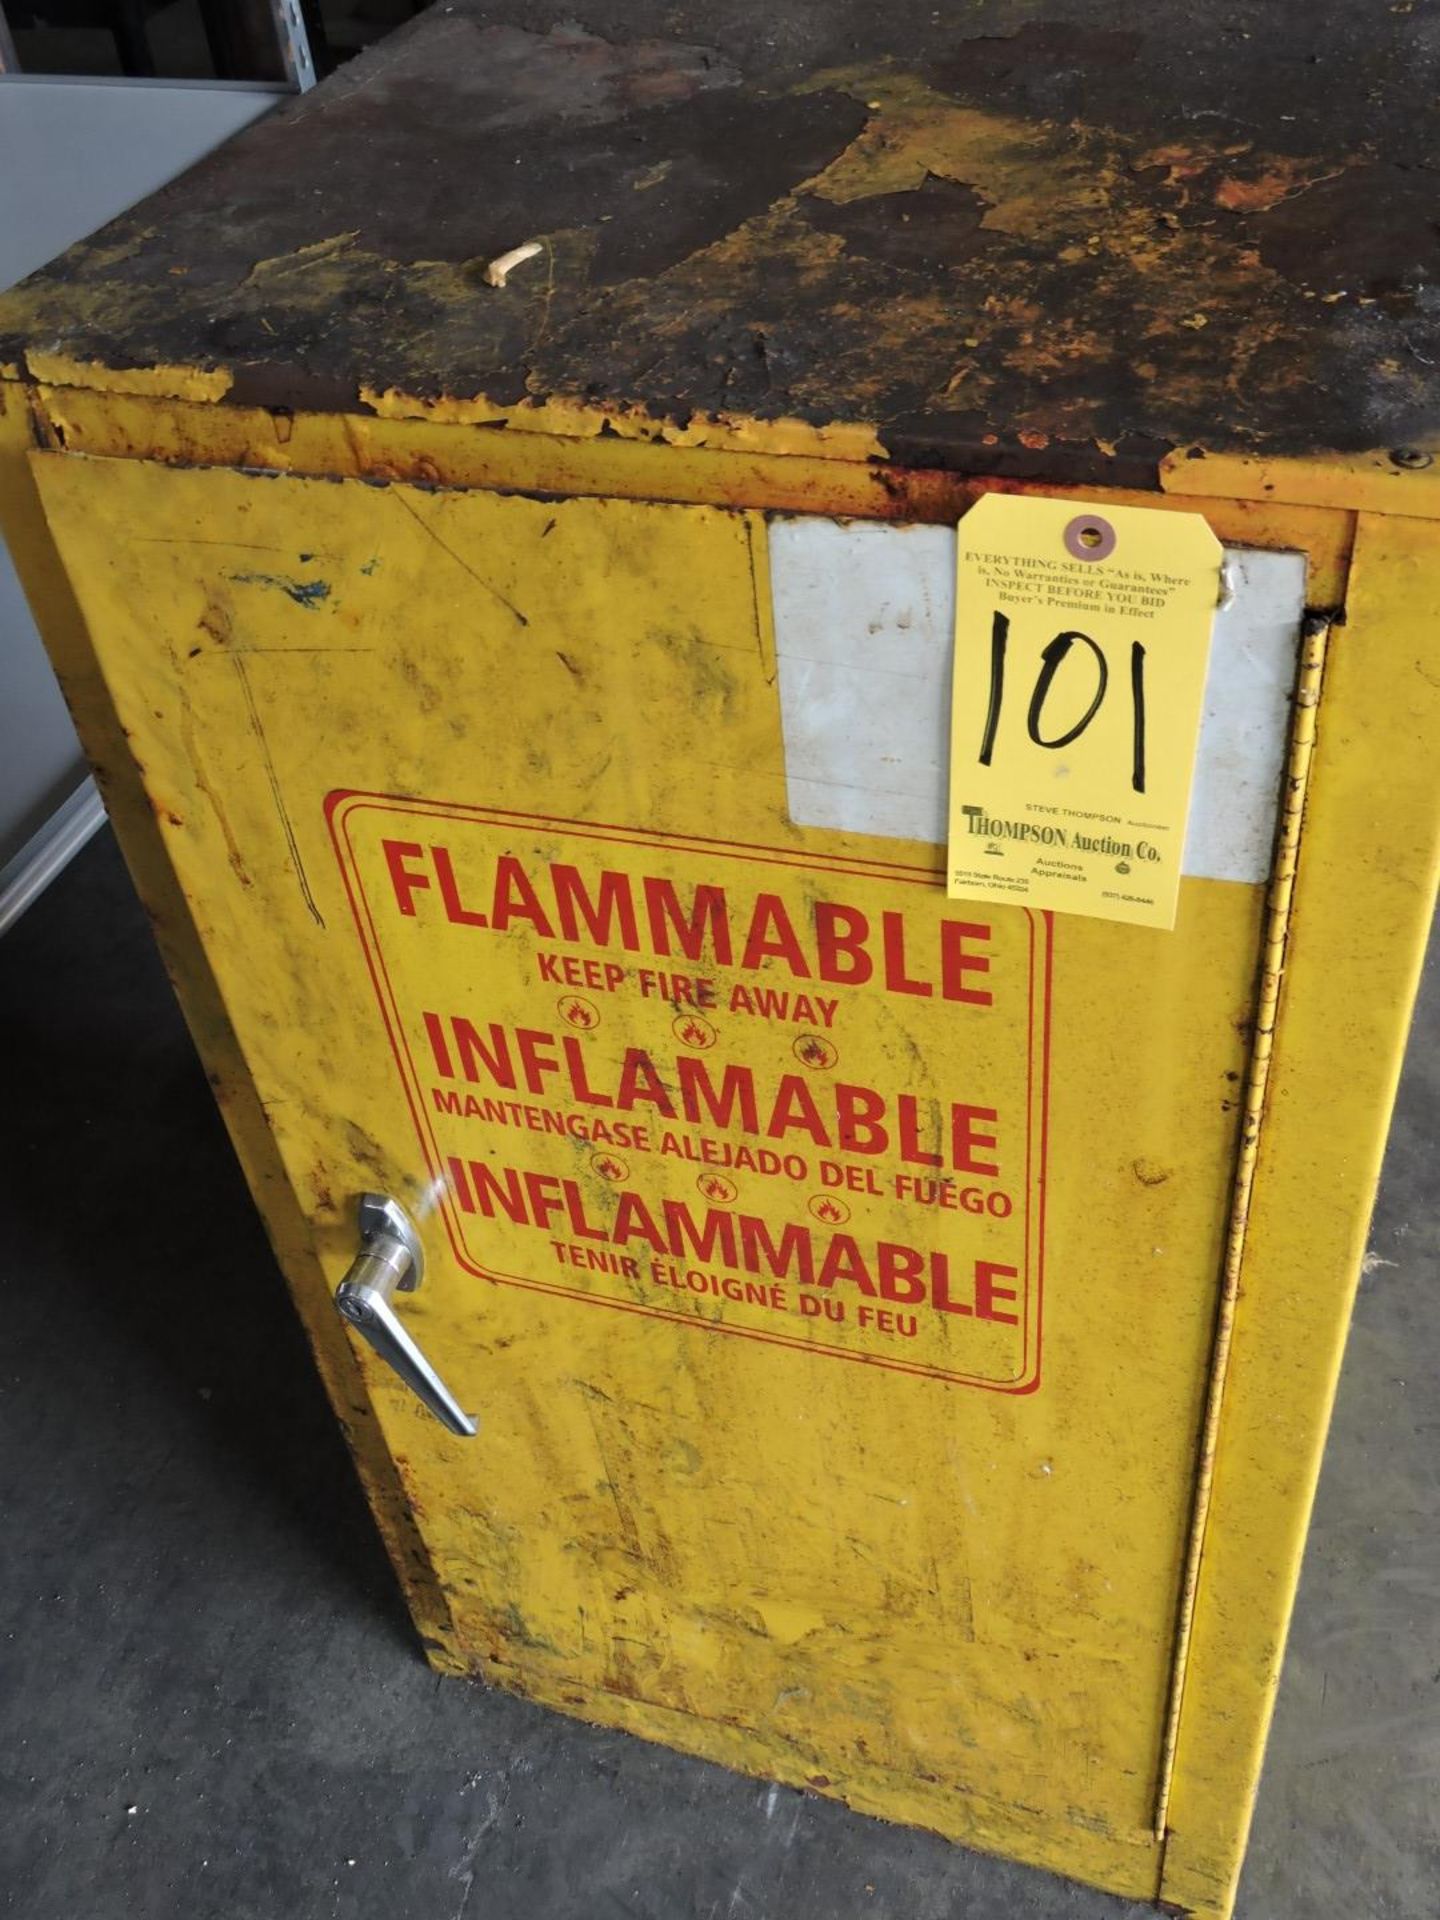 Flammable Substance Safety Storage Cabinet